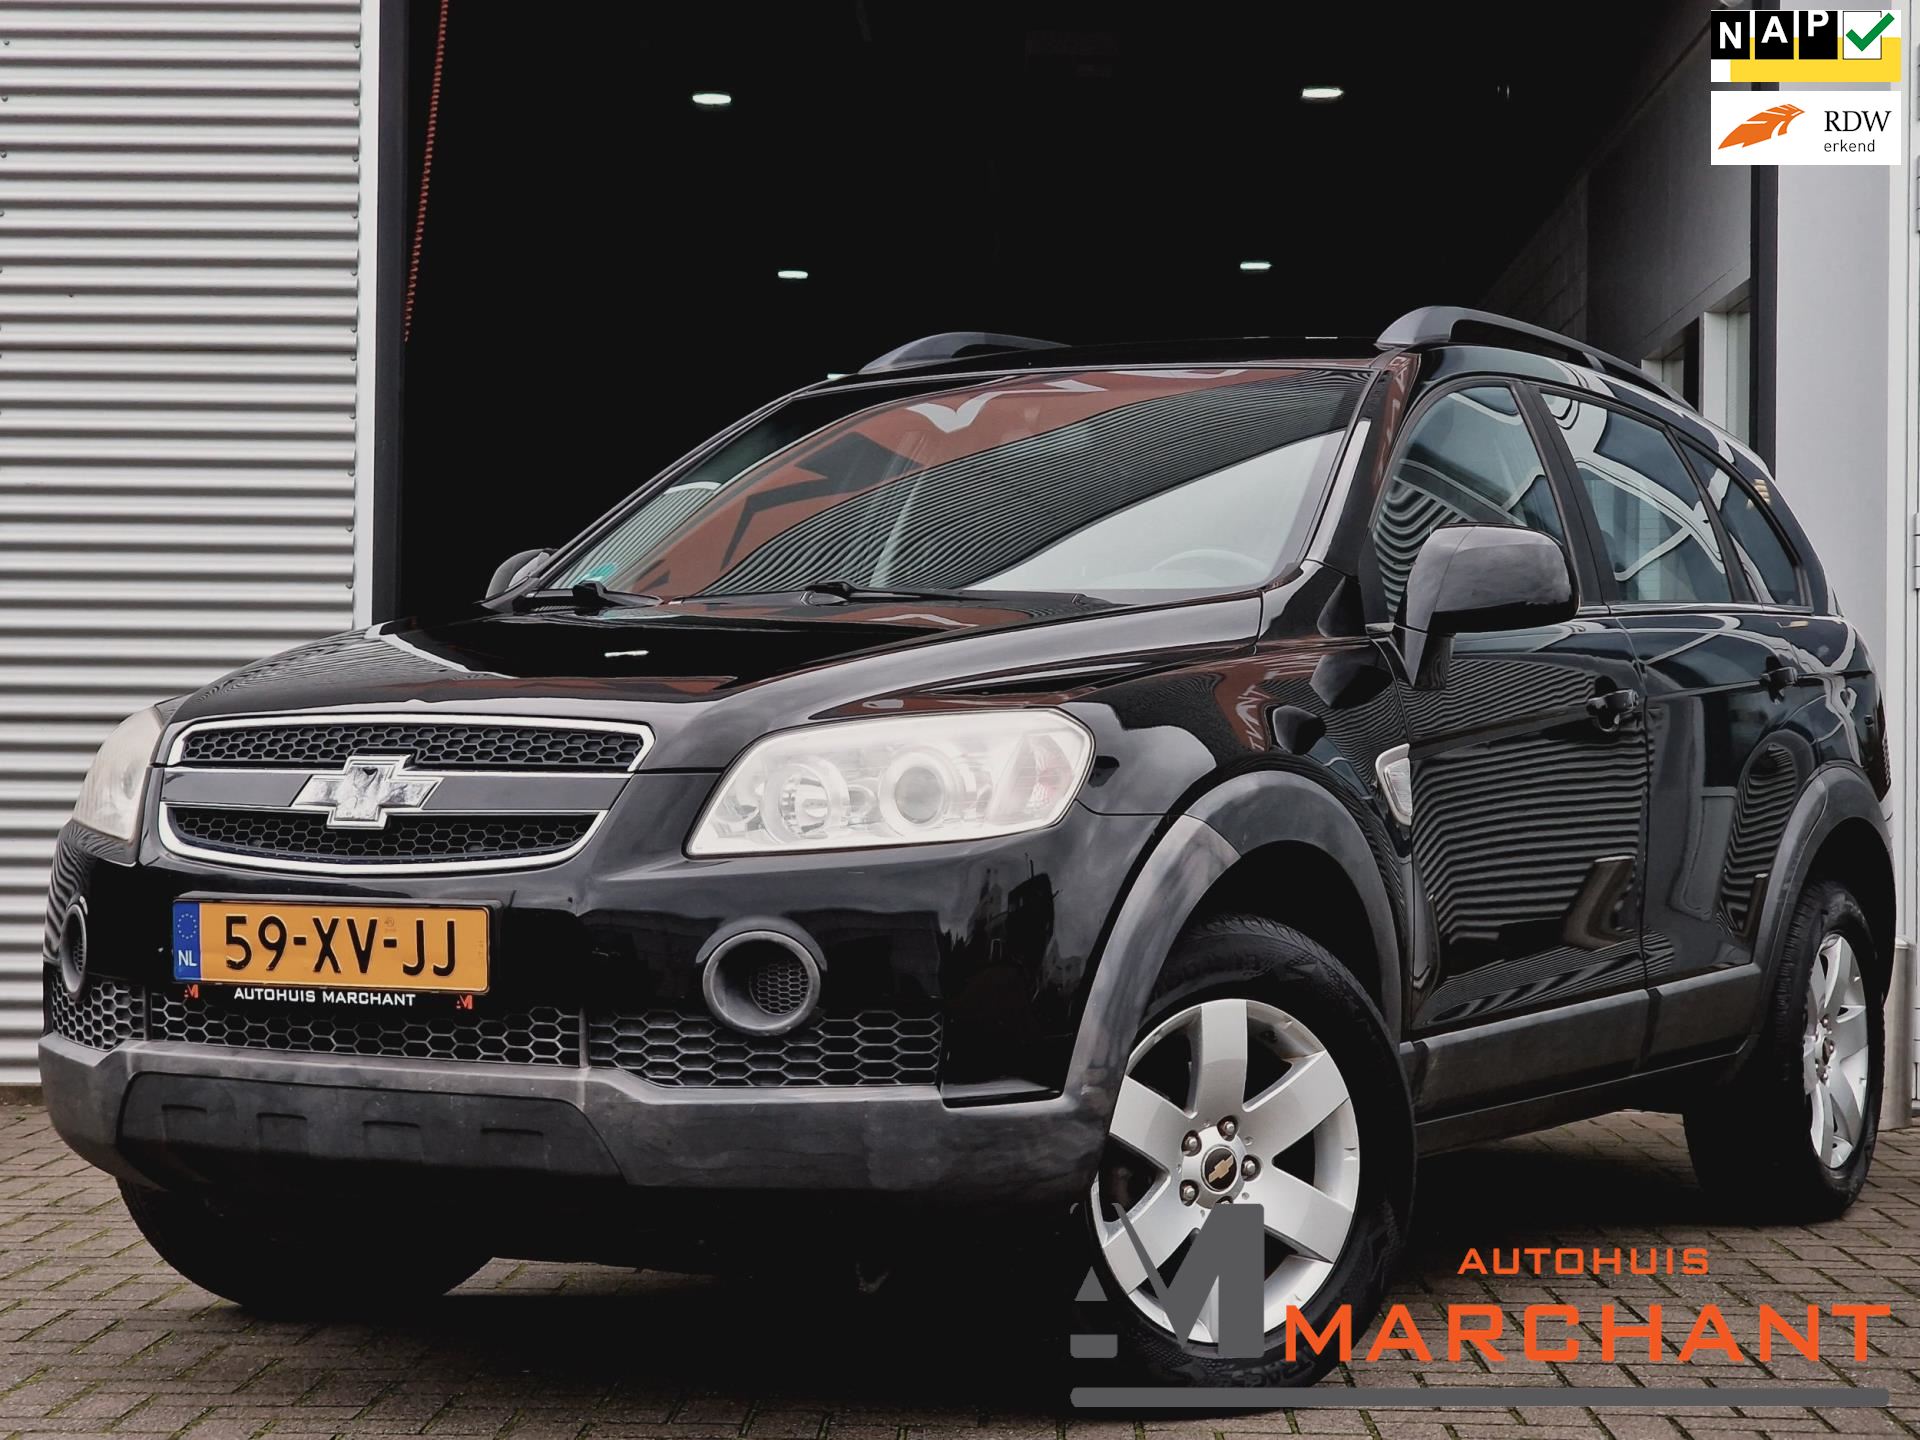 Chevrolet Captiva - 2.0 VCDI Style 2WD 7PERSOONS, TREKHAAK